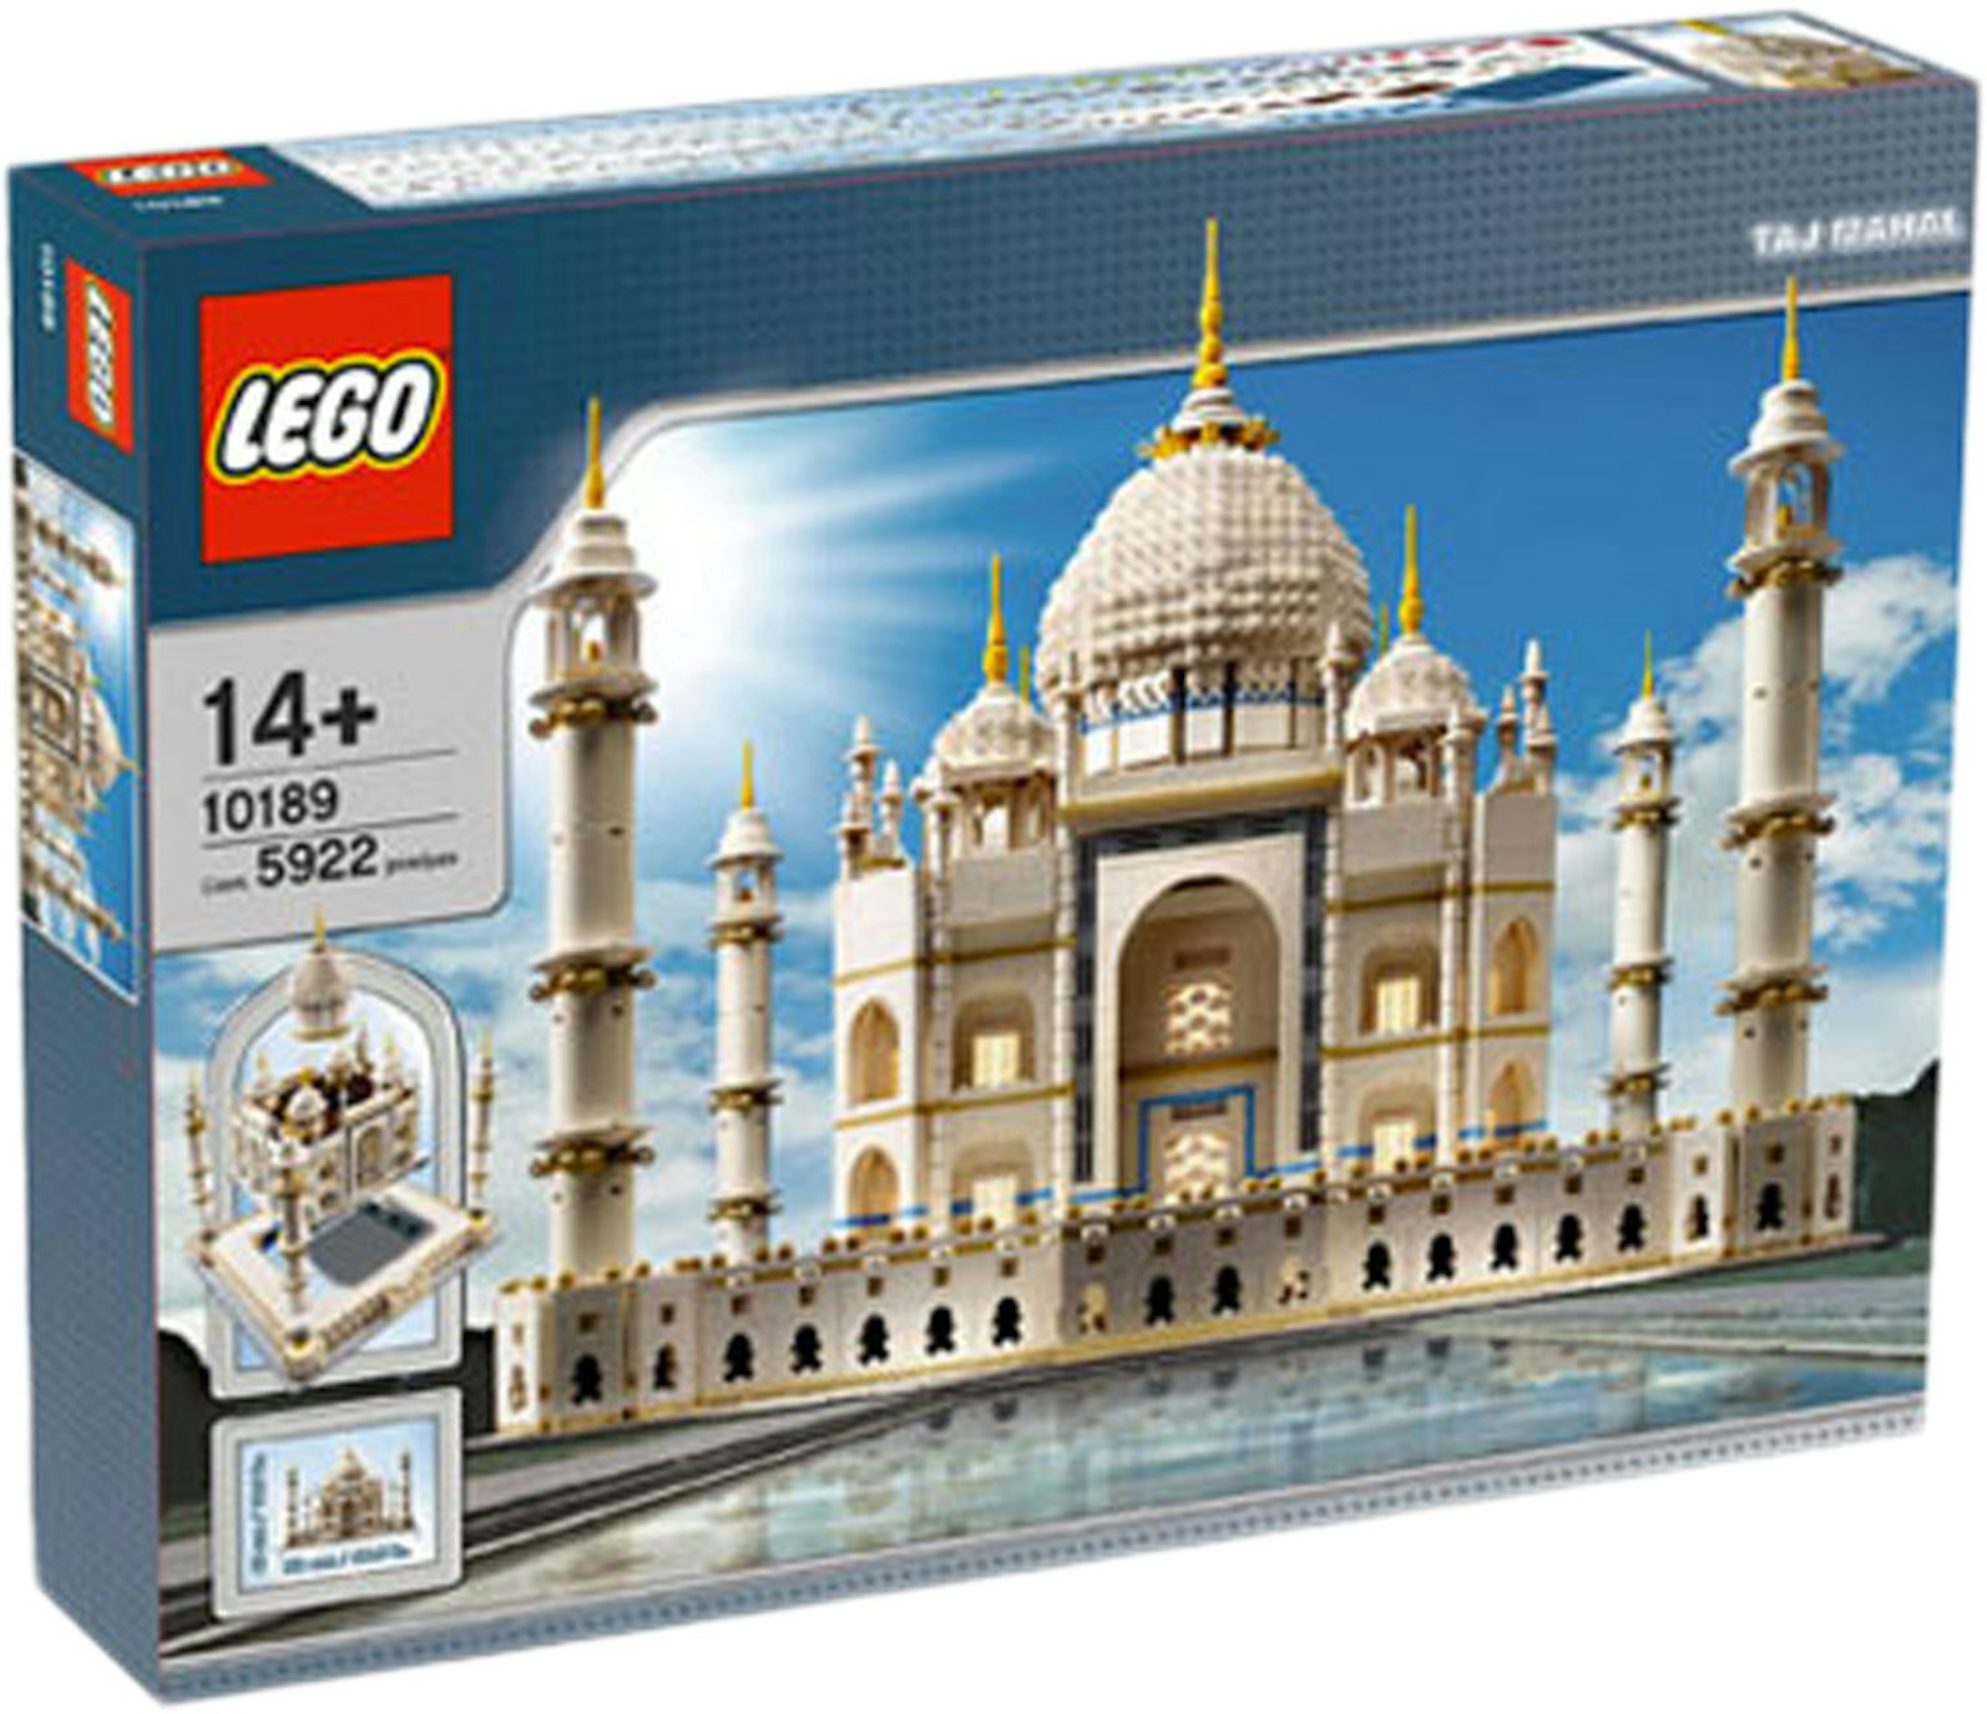 LEGO Creator Expert Taj Mahal (10189) Repackaged with Box and Instructions  673419130585